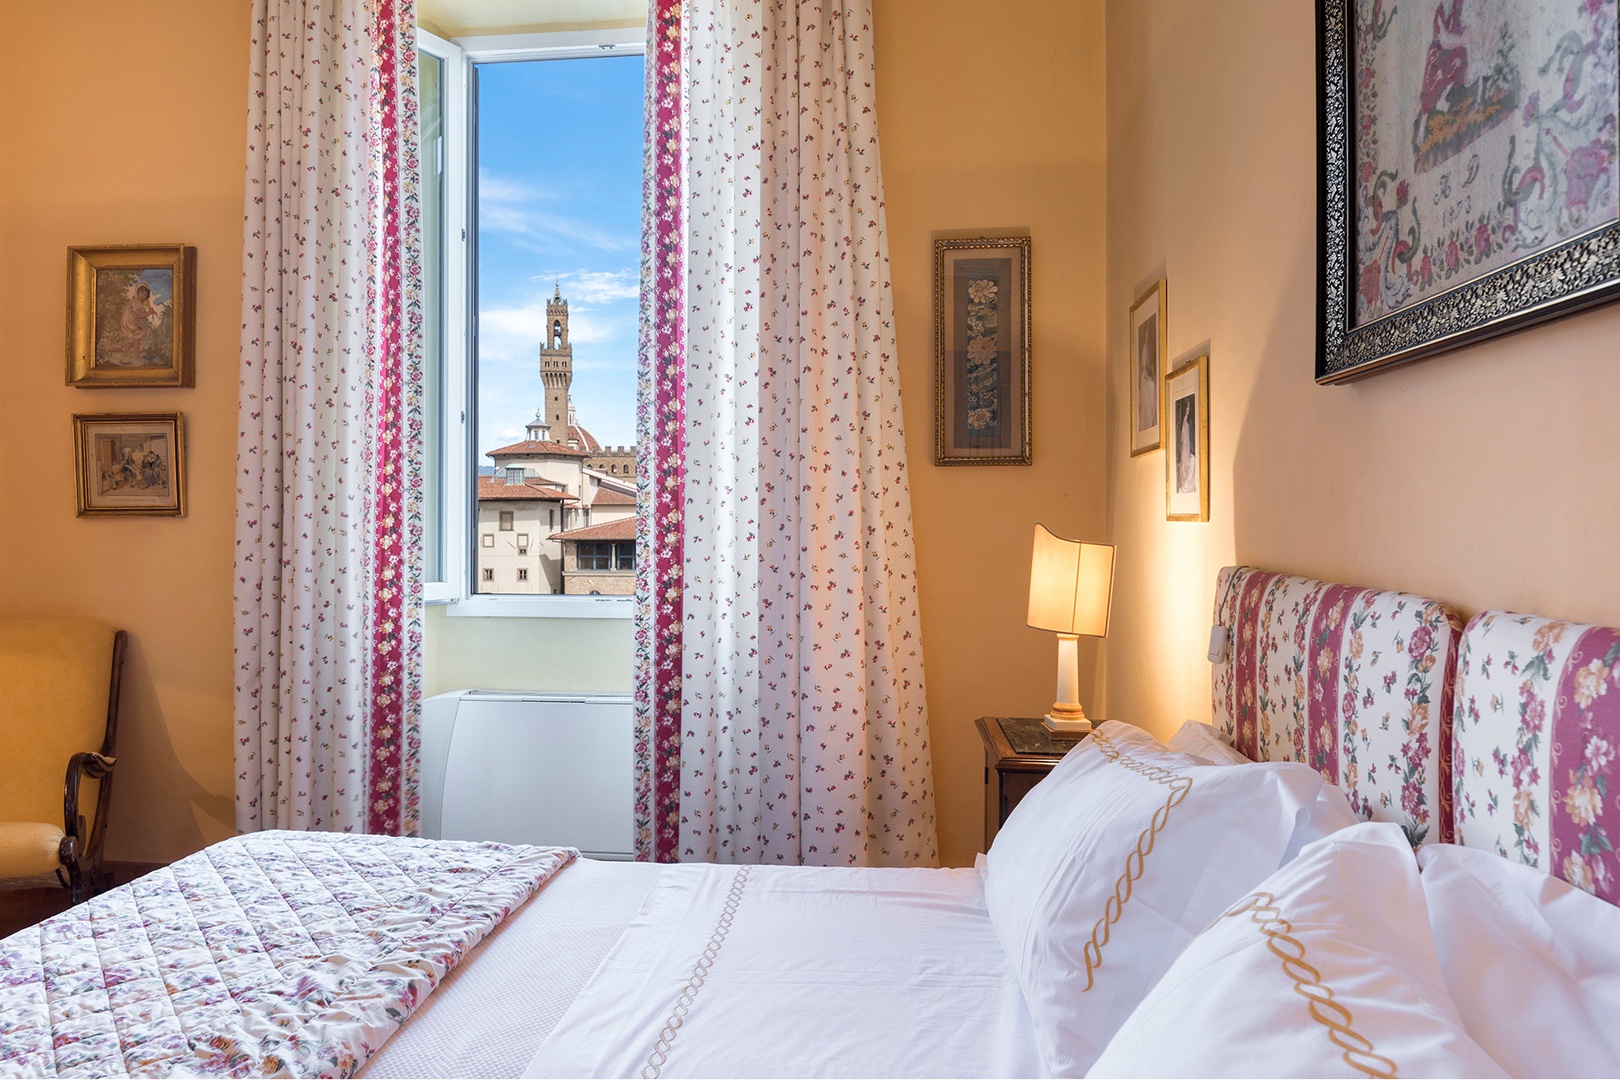 Sunny bedroom 1 has gorgeous Arno River views. See the bell tower of Palazzo Vecchio in this photo.